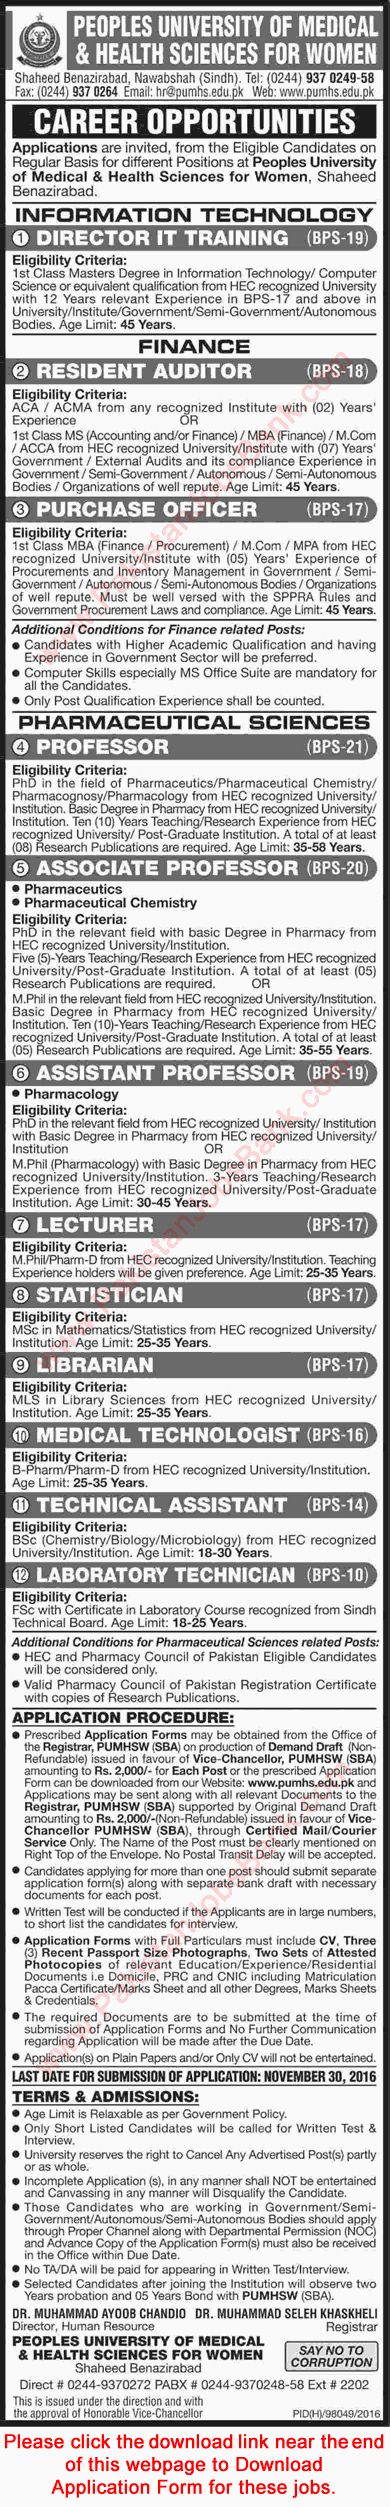 PUMHS Nawabshah Jobs November 2016 Application Form Teaching Faculty & Others Latest